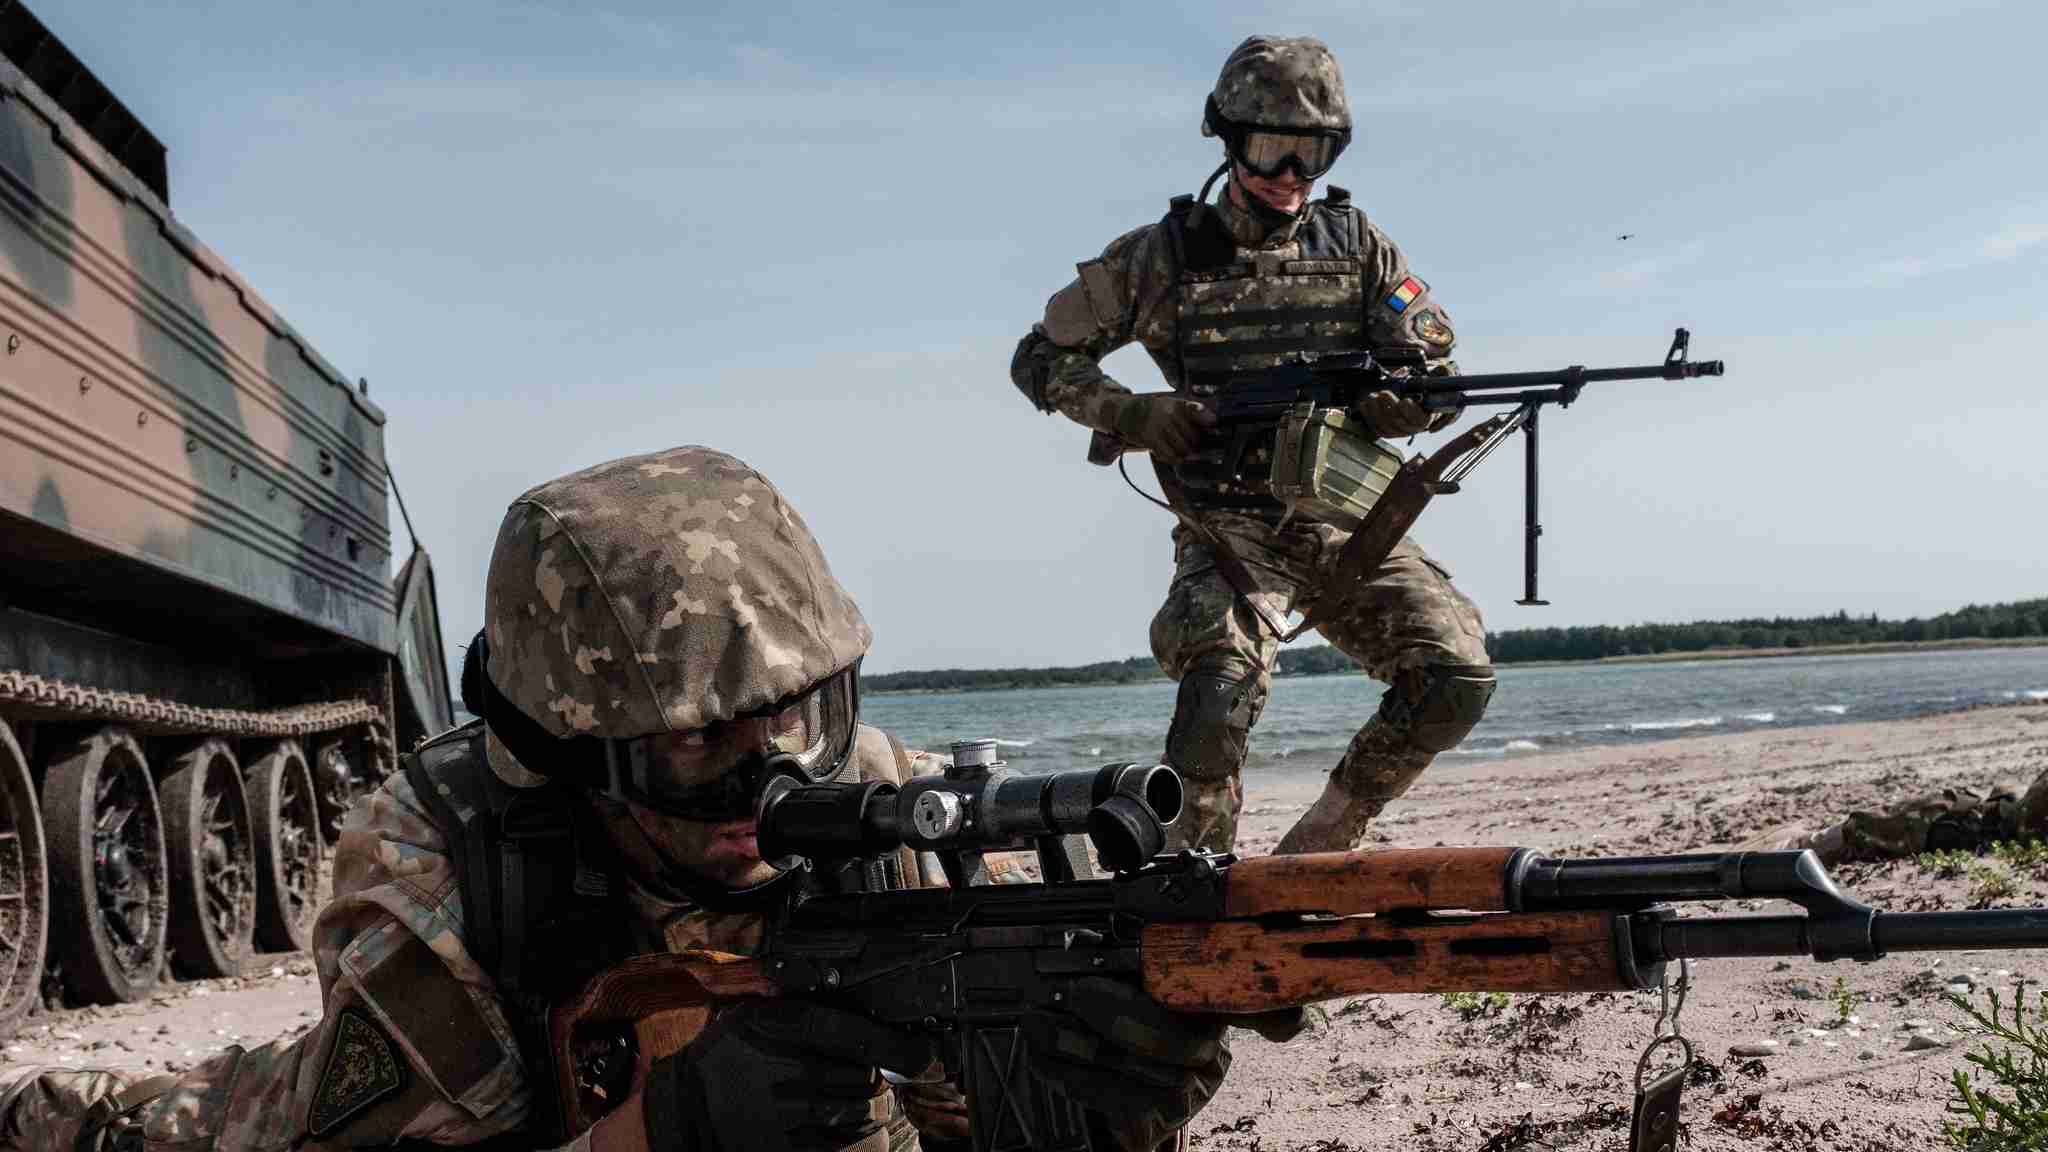 Photo: Romanian Marines storm a beach on Saaremaa Island in Estonia during BALTOPS 2019. An annual US-led exercise involving 16 NATO Allies and two partner nations, BALTOPS focuses on improving maritime interoperability through multinational amphibious operations in the Baltic Sea region. Credit: NATO